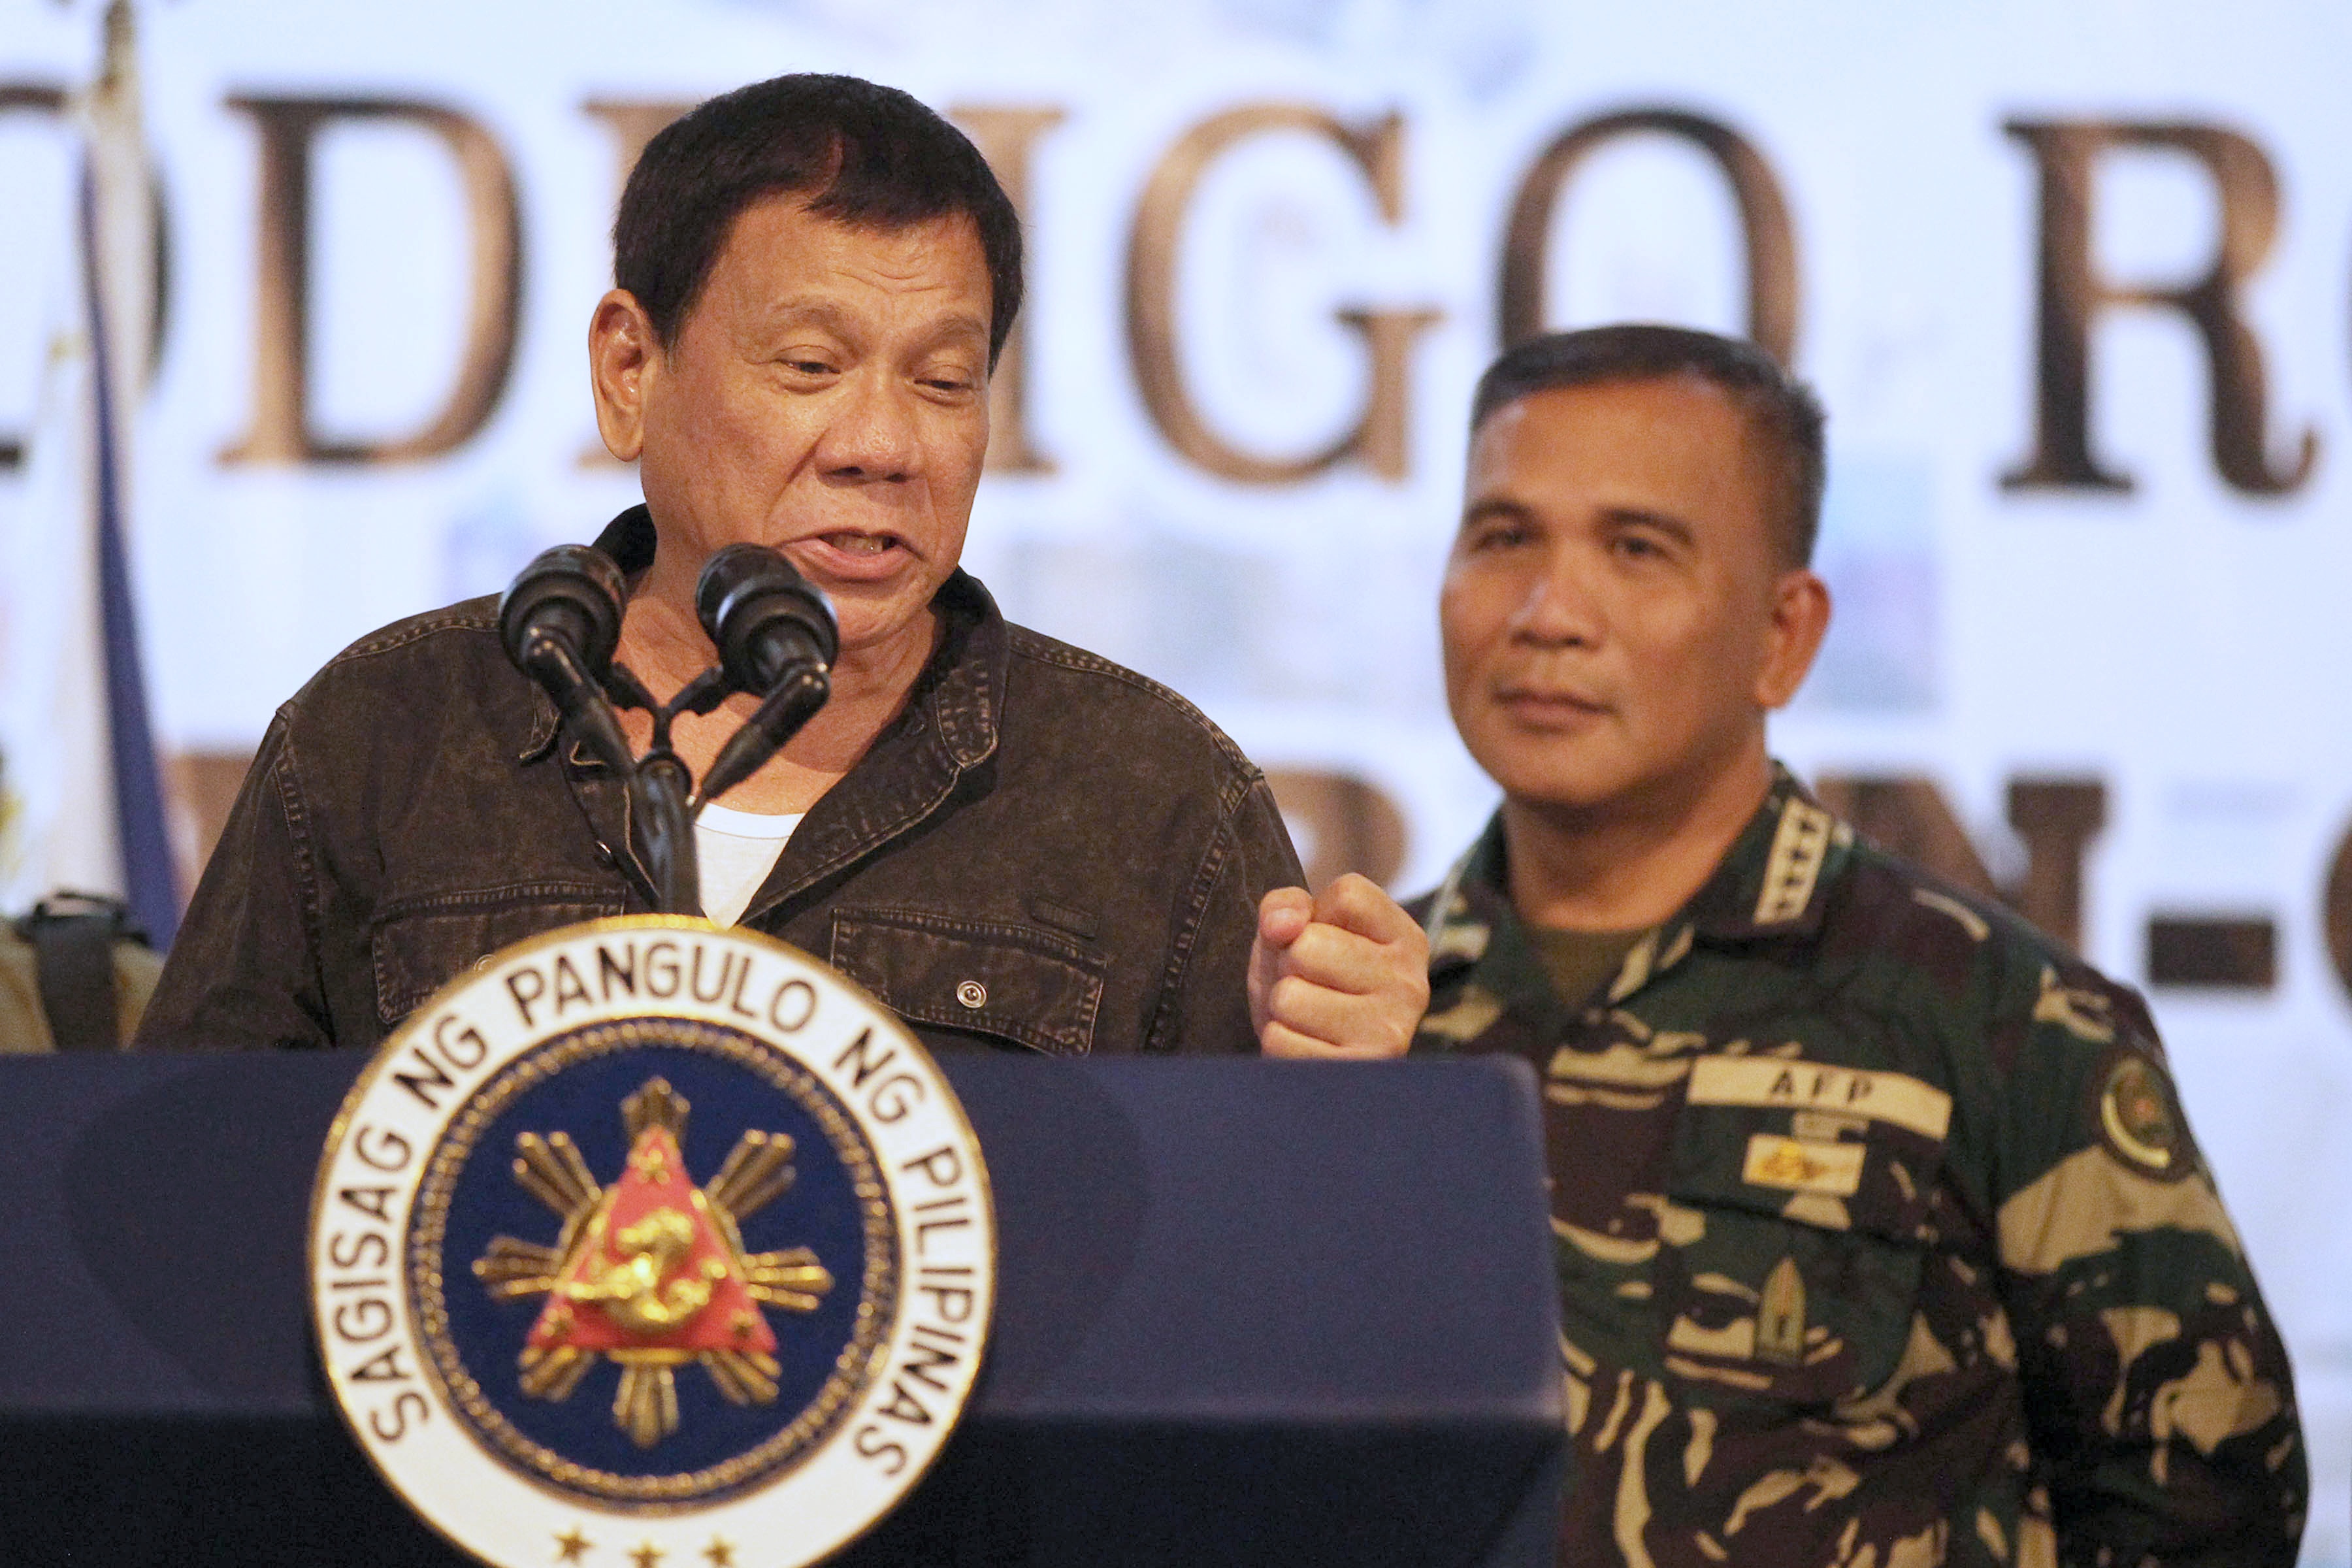 DUTERTE'S WARNING. President Rodrigo Duterte reacts angrily to a letter from Chief Justice Maria Lourdes Sereno raising concern over his drug list. File photo by Presidential Photographers Division 